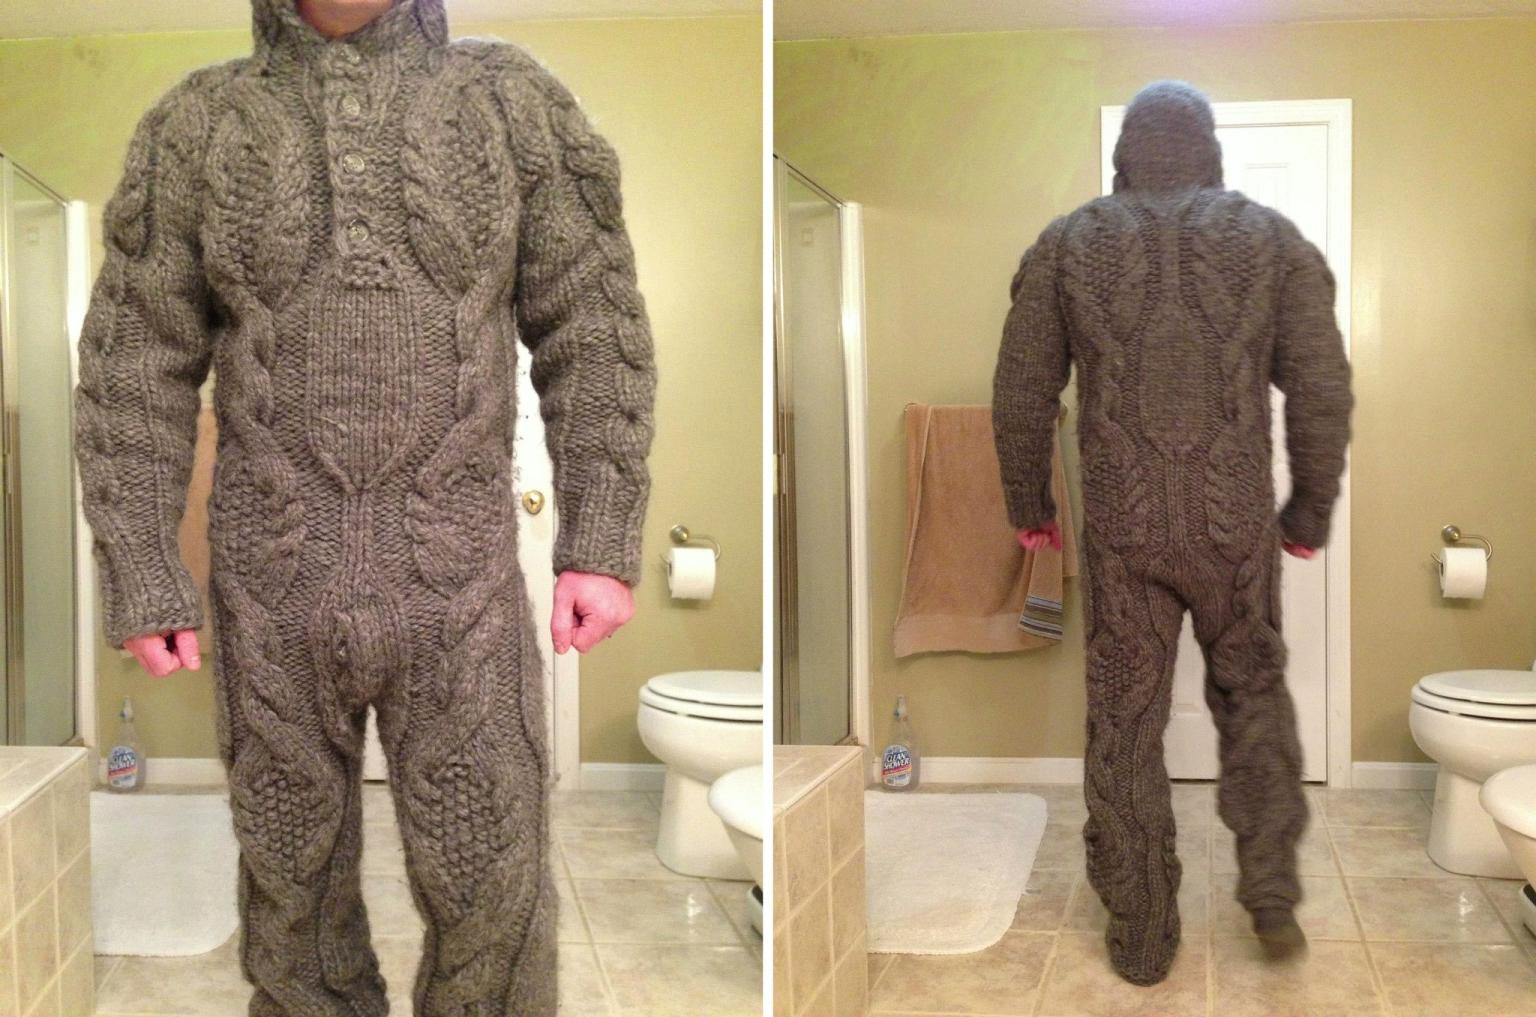 Full Body Knitted Suit For Cold Days